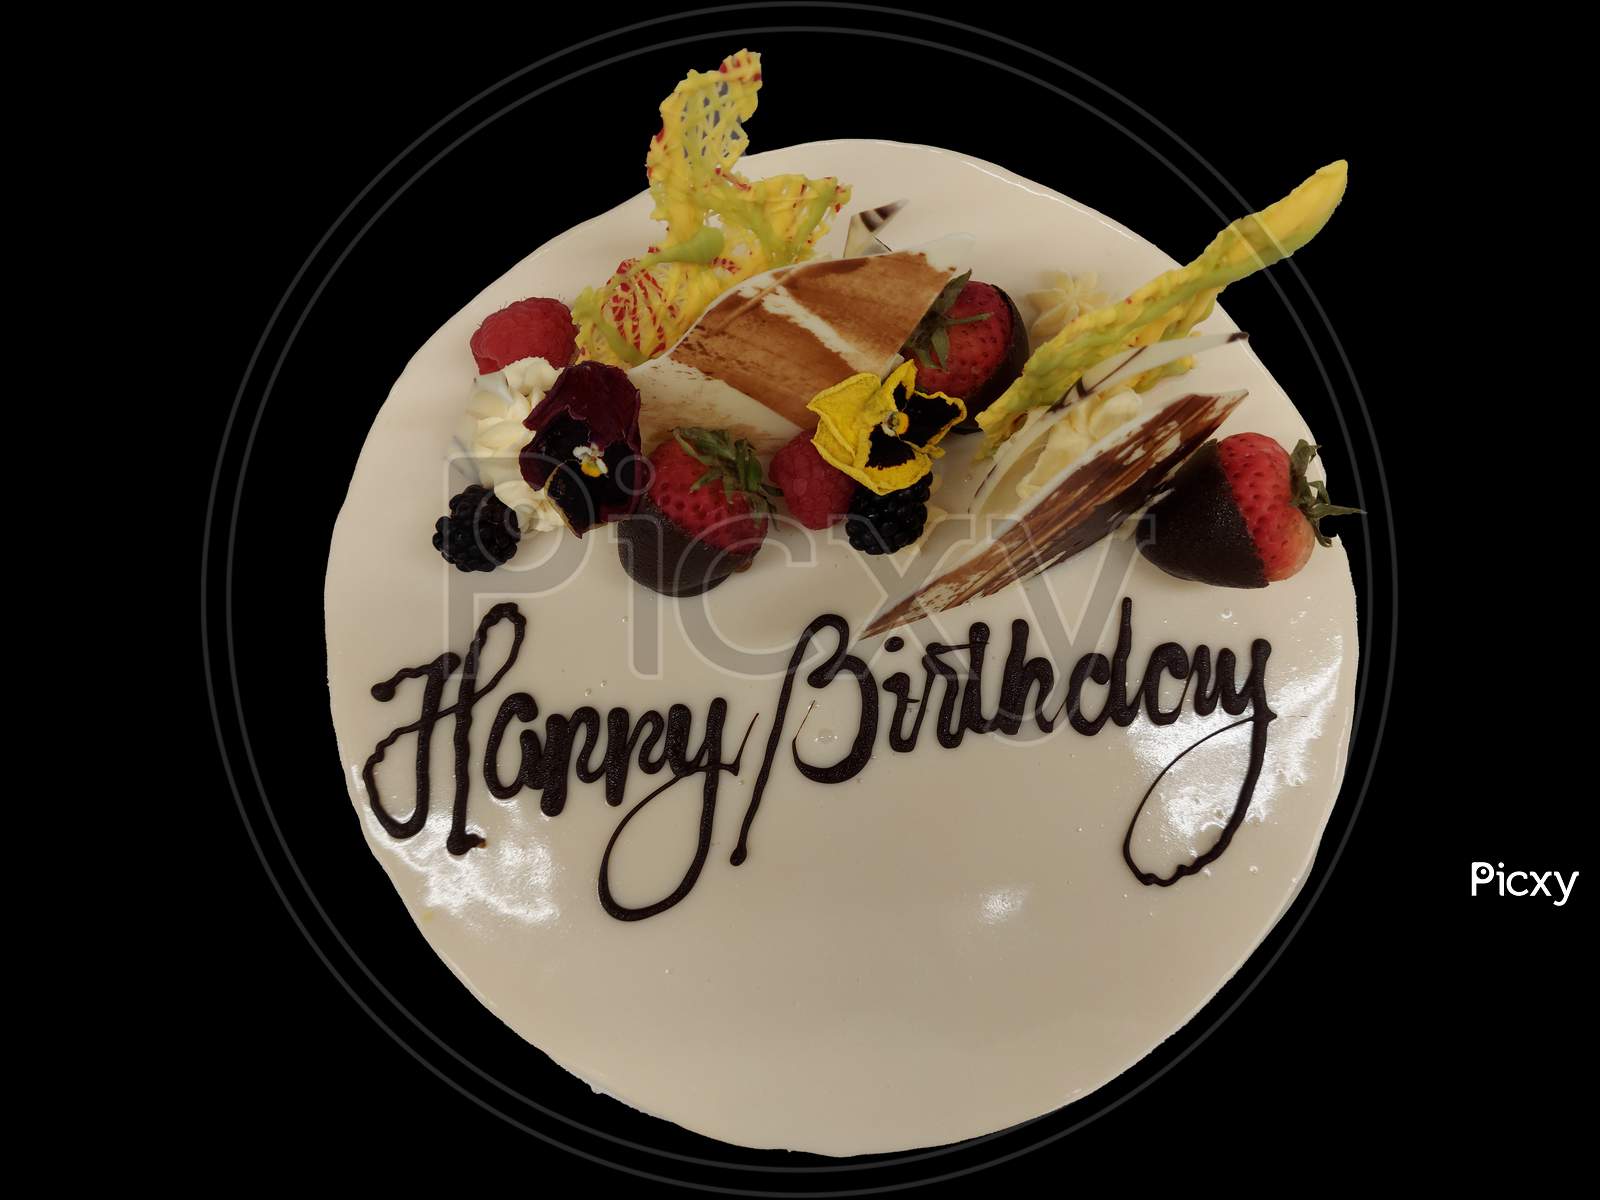 Celebration Cake With Happy Birthday Writing On It Isolated In Black Background